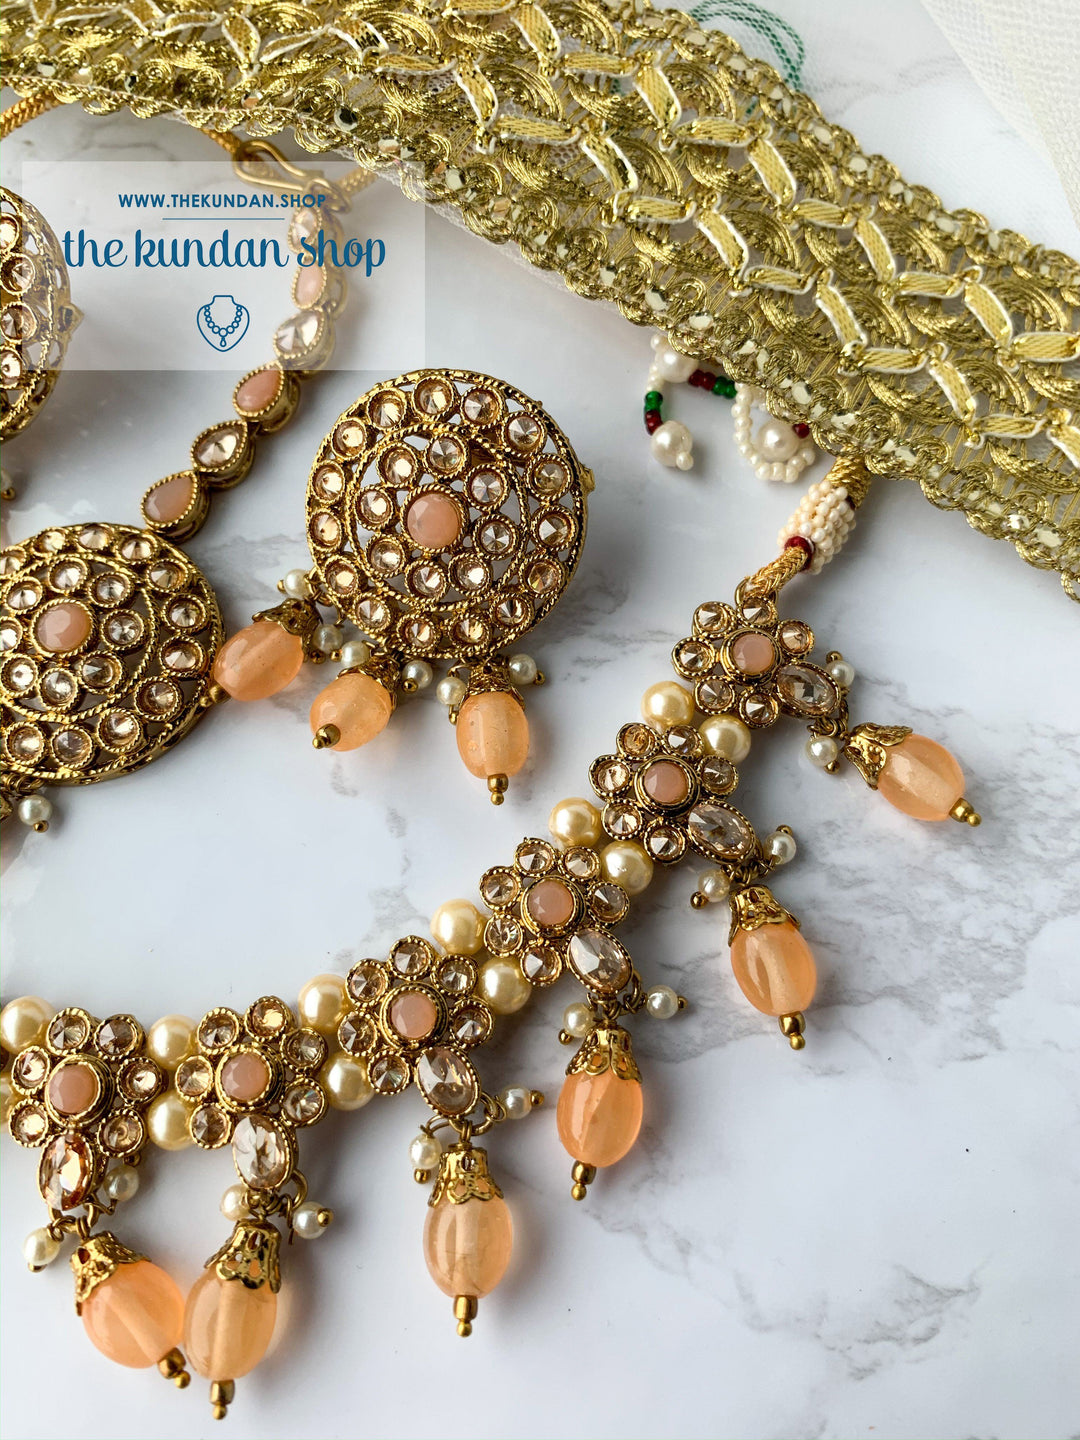 Meet in the Middle - Peach, Necklace Sets - THE KUNDAN SHOP